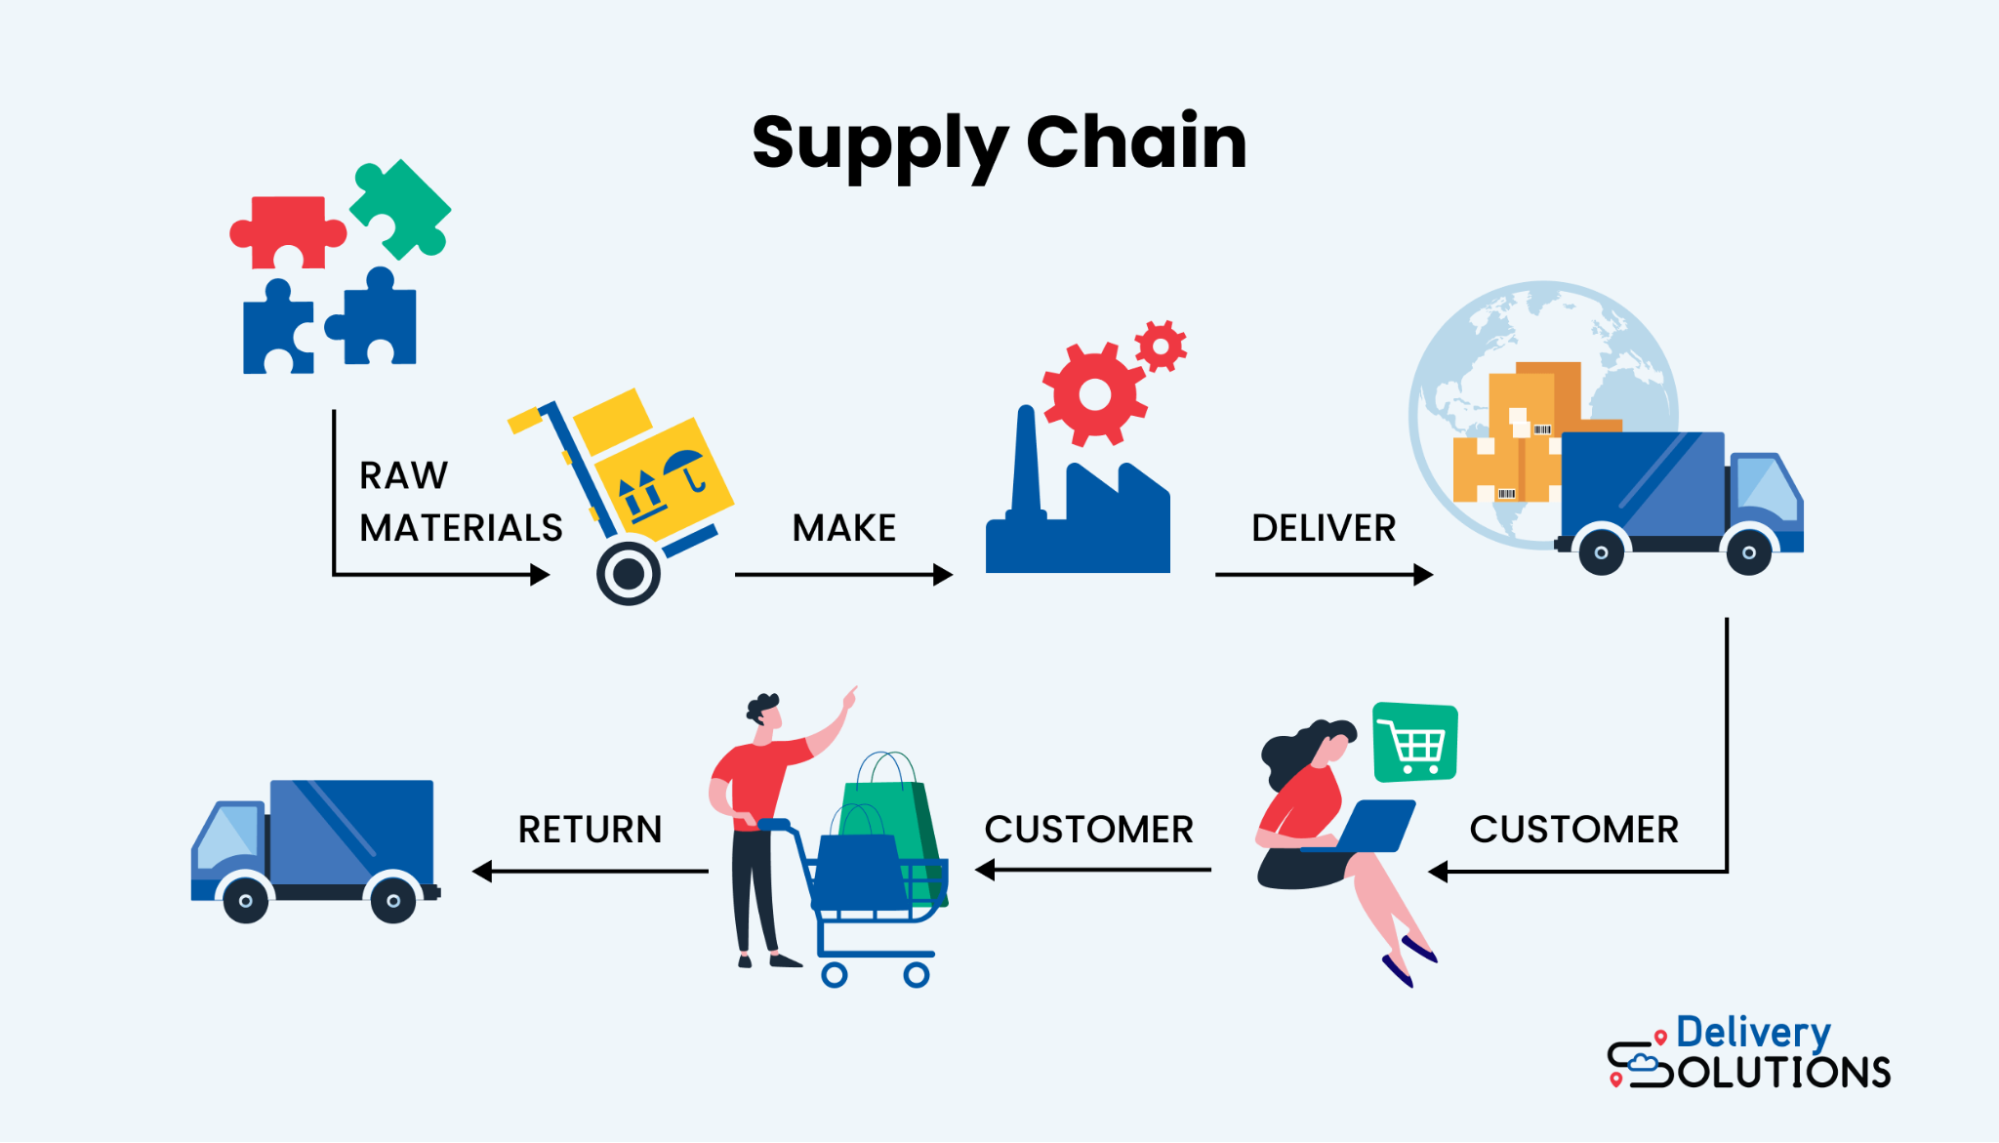 Sourcing, shipping, and delivery stages